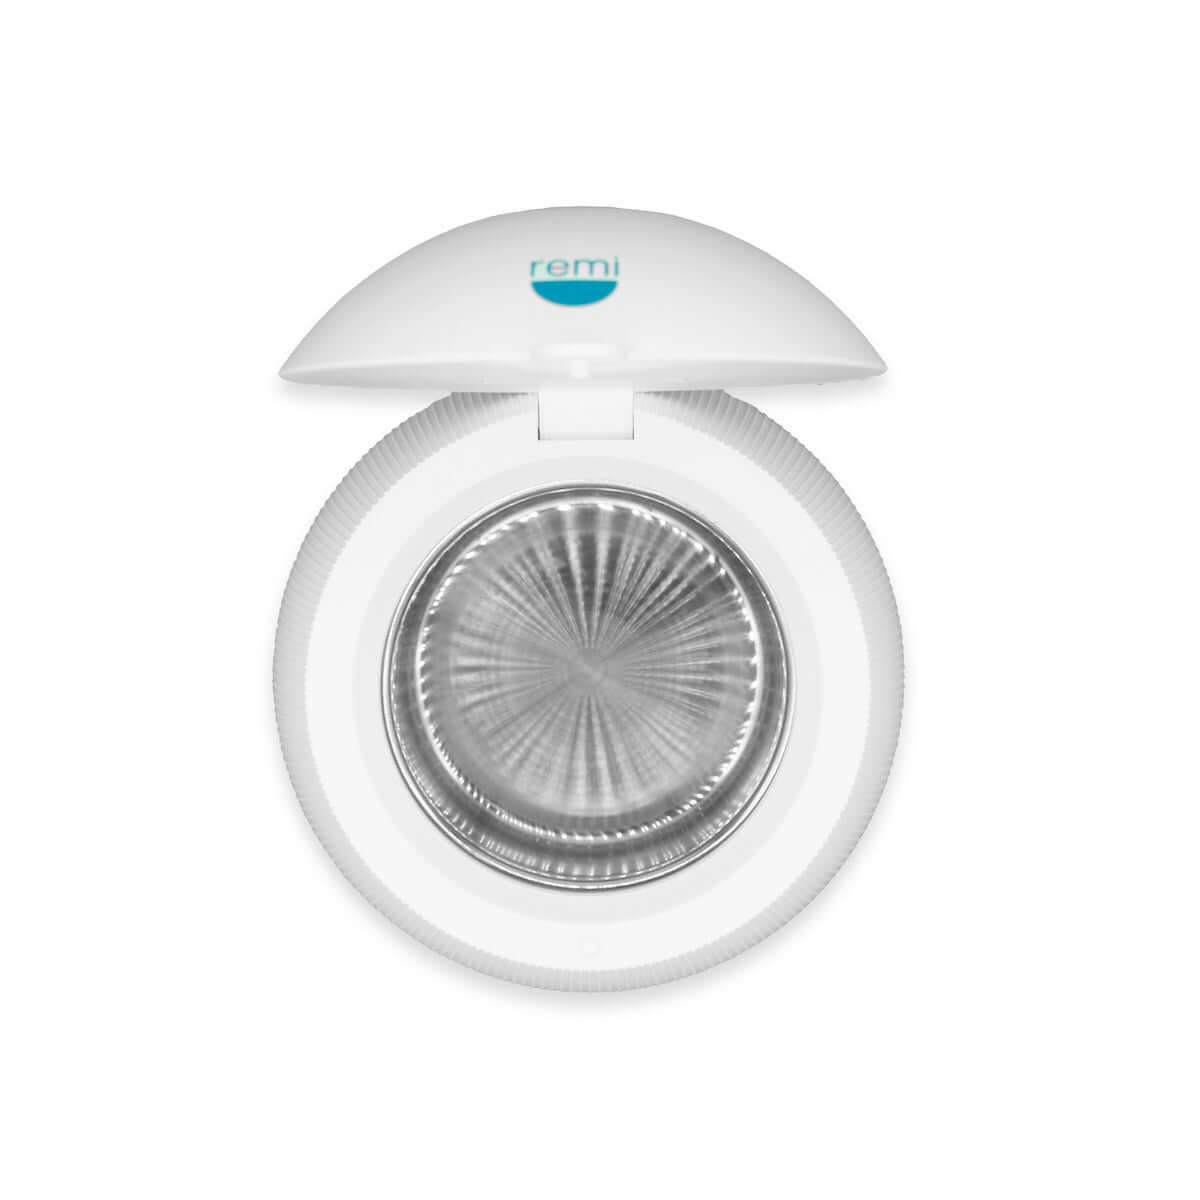 Ceiling-mounted smoke detector with a transparent cover and &quot;Ultrasonic Cleaning &amp; Sanitizing Device&quot; branding, featuring ultrasonic cleaning device technology.